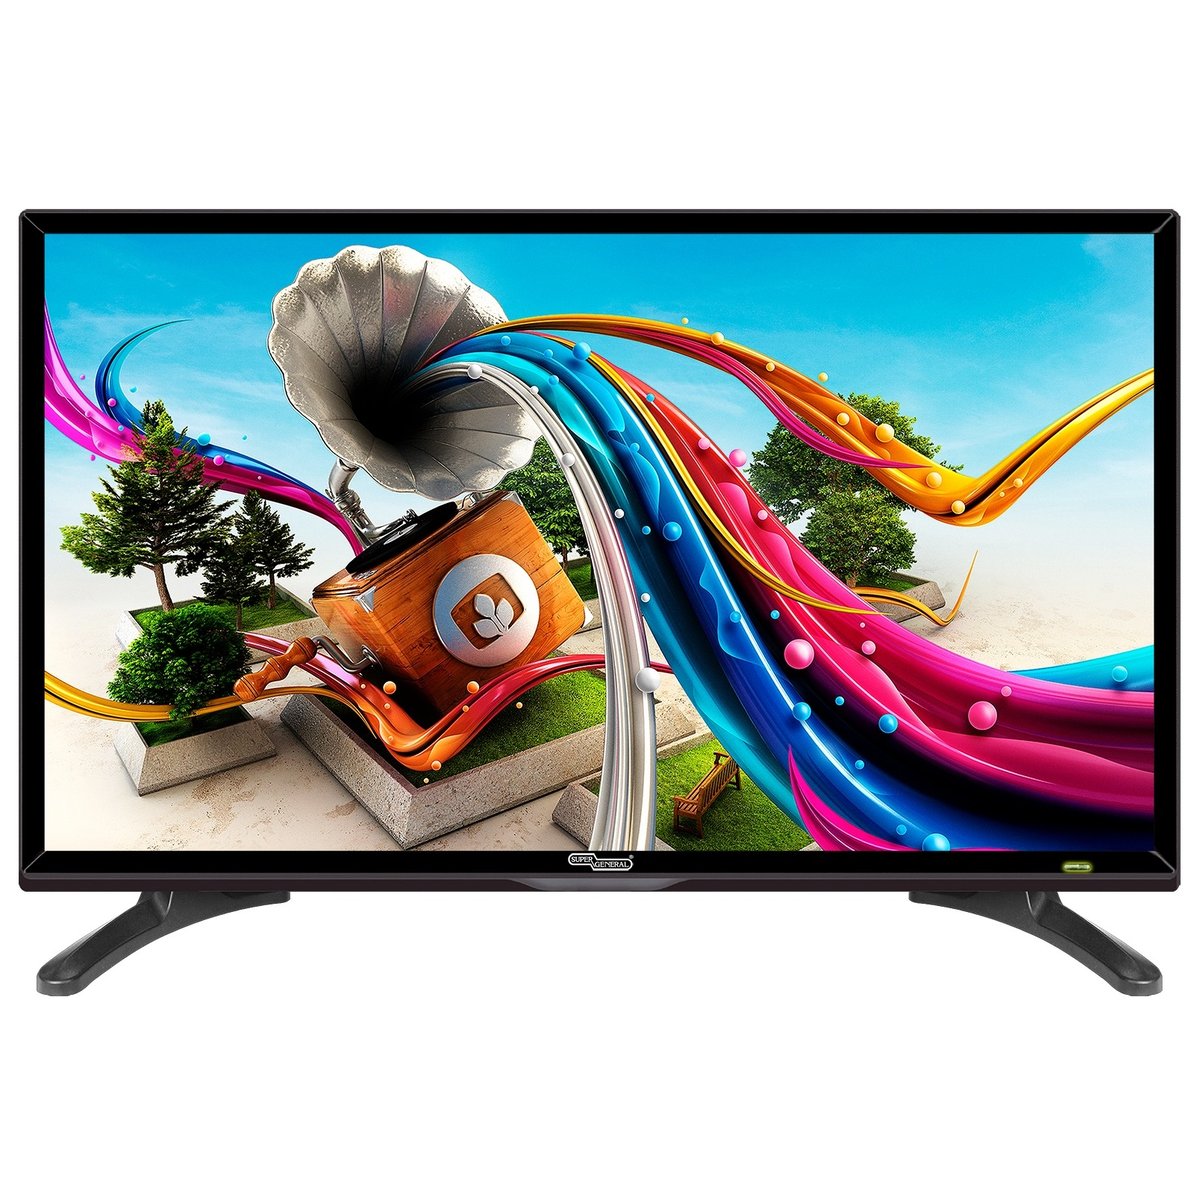 SUPER GENERA 32 HD, SMART TV - Frameless and with Wall Bracket, Black - KSGLED32HHS9A